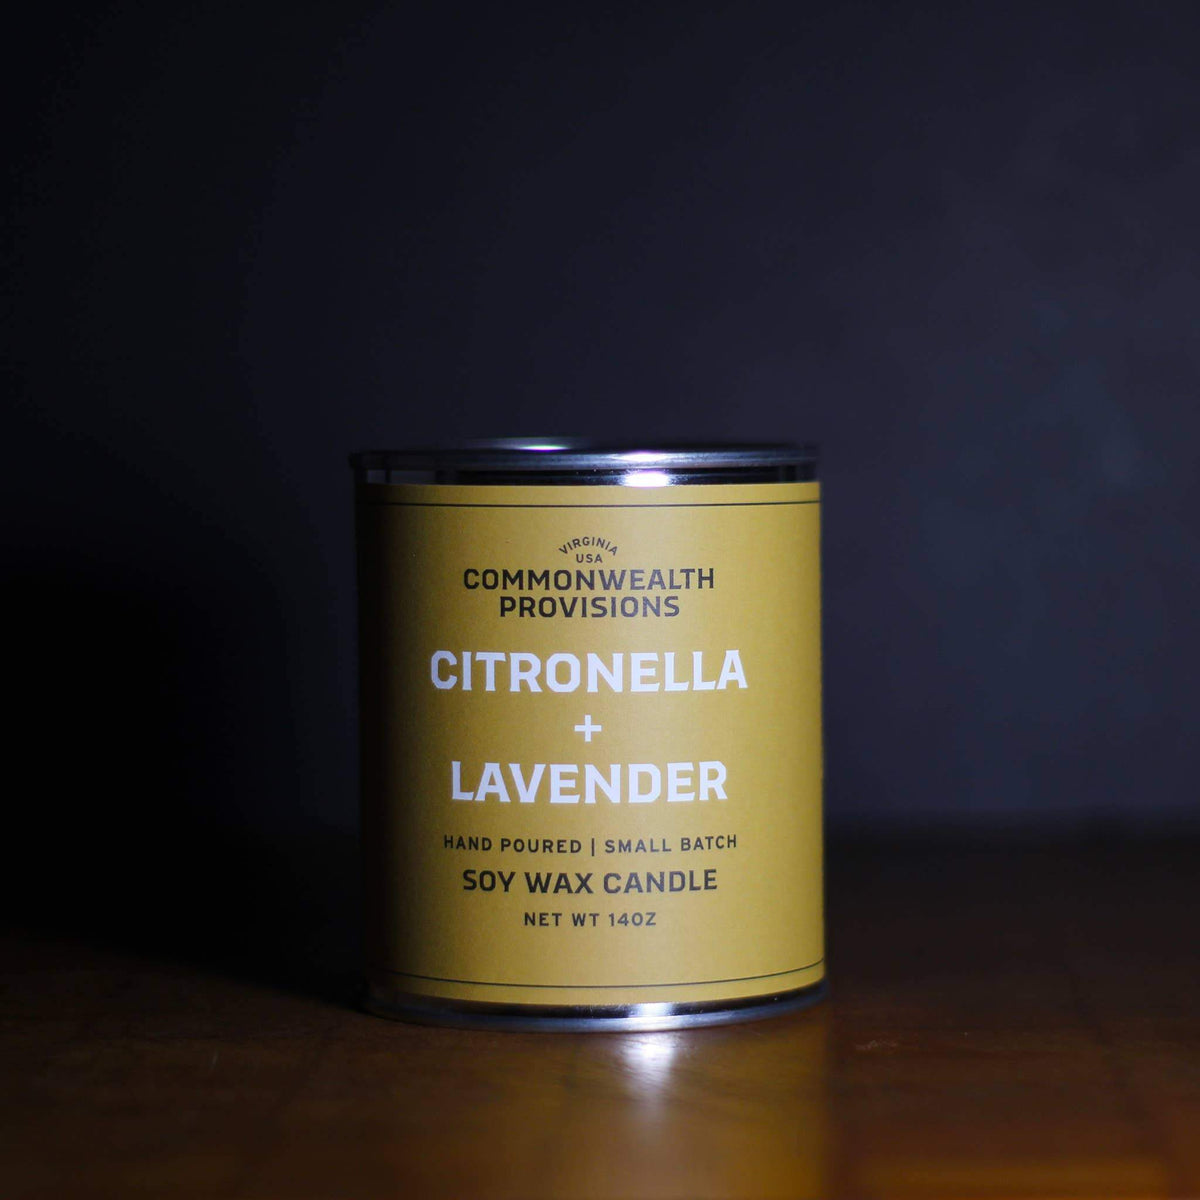 A soy wax Commonwealth Provisions Citronella + Lavender Candle in a metal tin on a dark, wooden surface with a soft focus background.